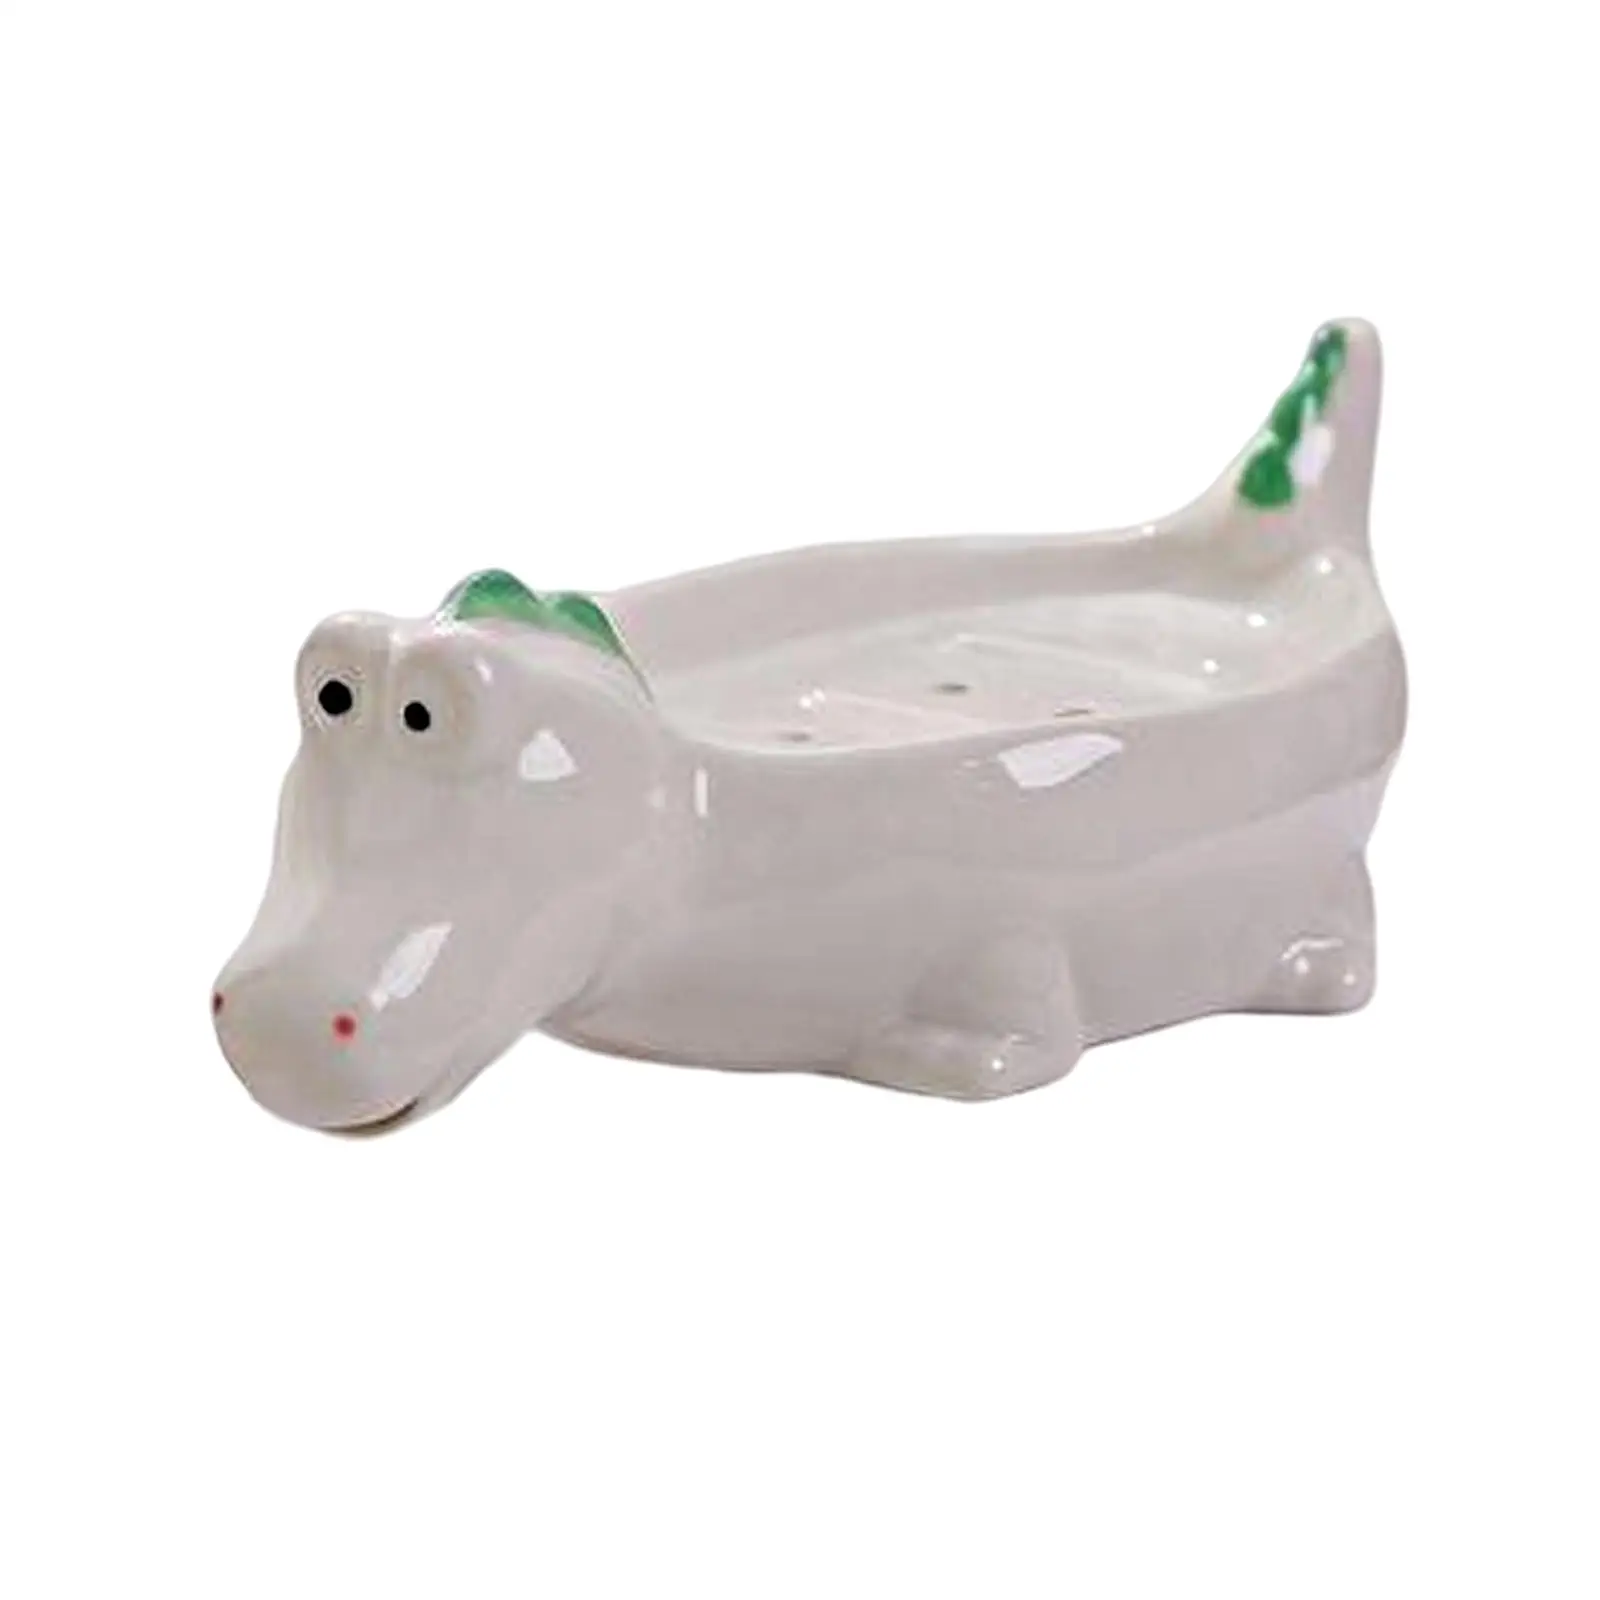 Animal Shaped Soap Dish, Soap Tray for Toilet Kitchen Bathroom Shower Decoration